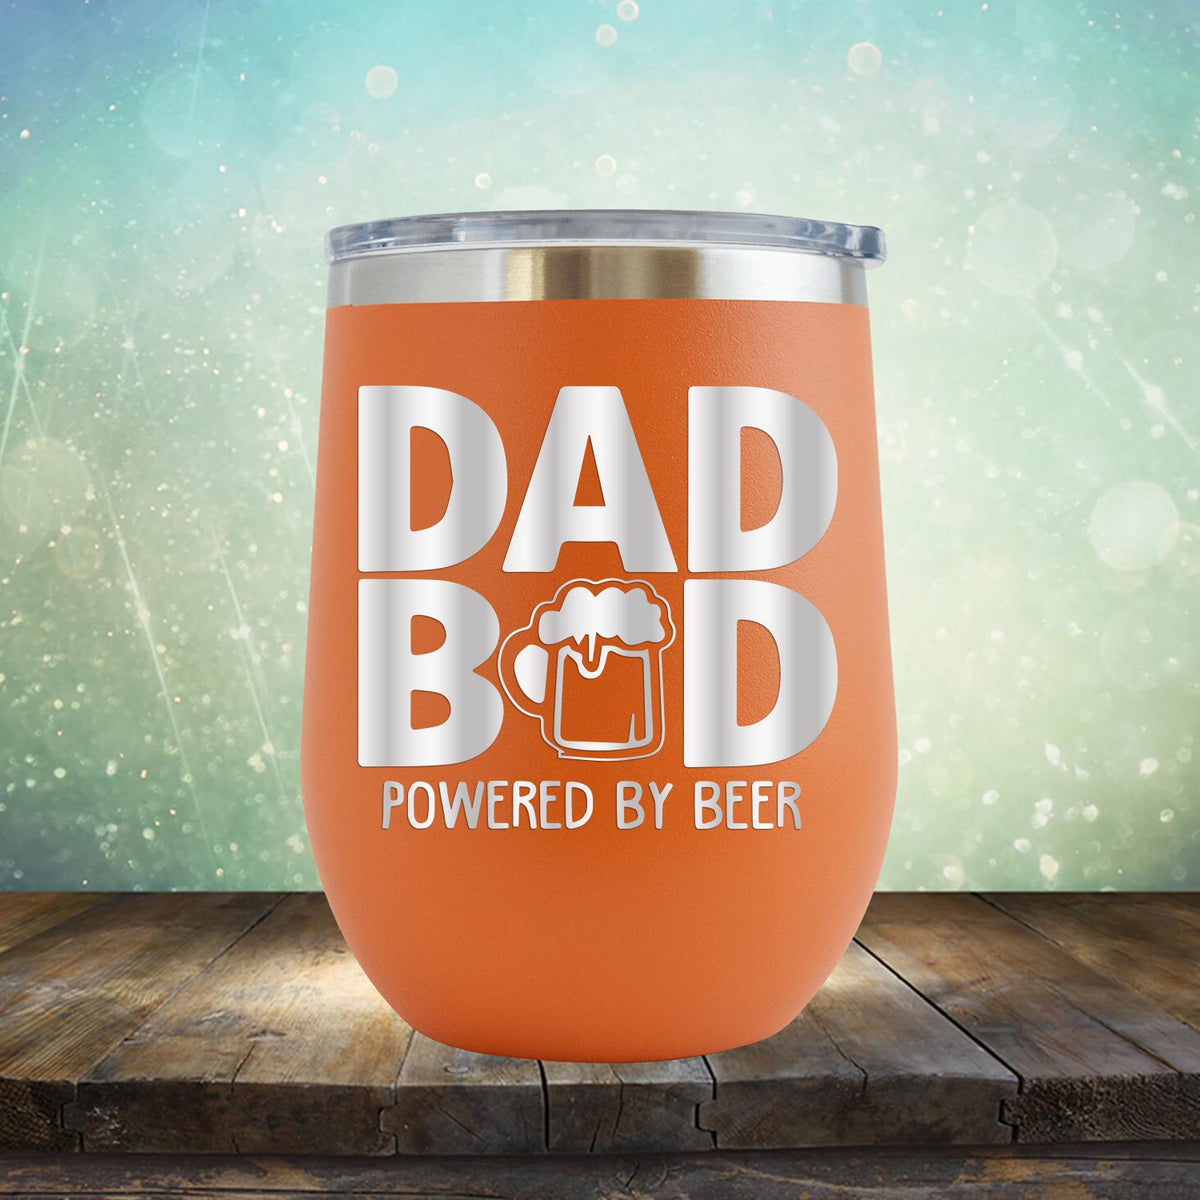 Dad Bod Powered by Beer - Stemless Wine Cup